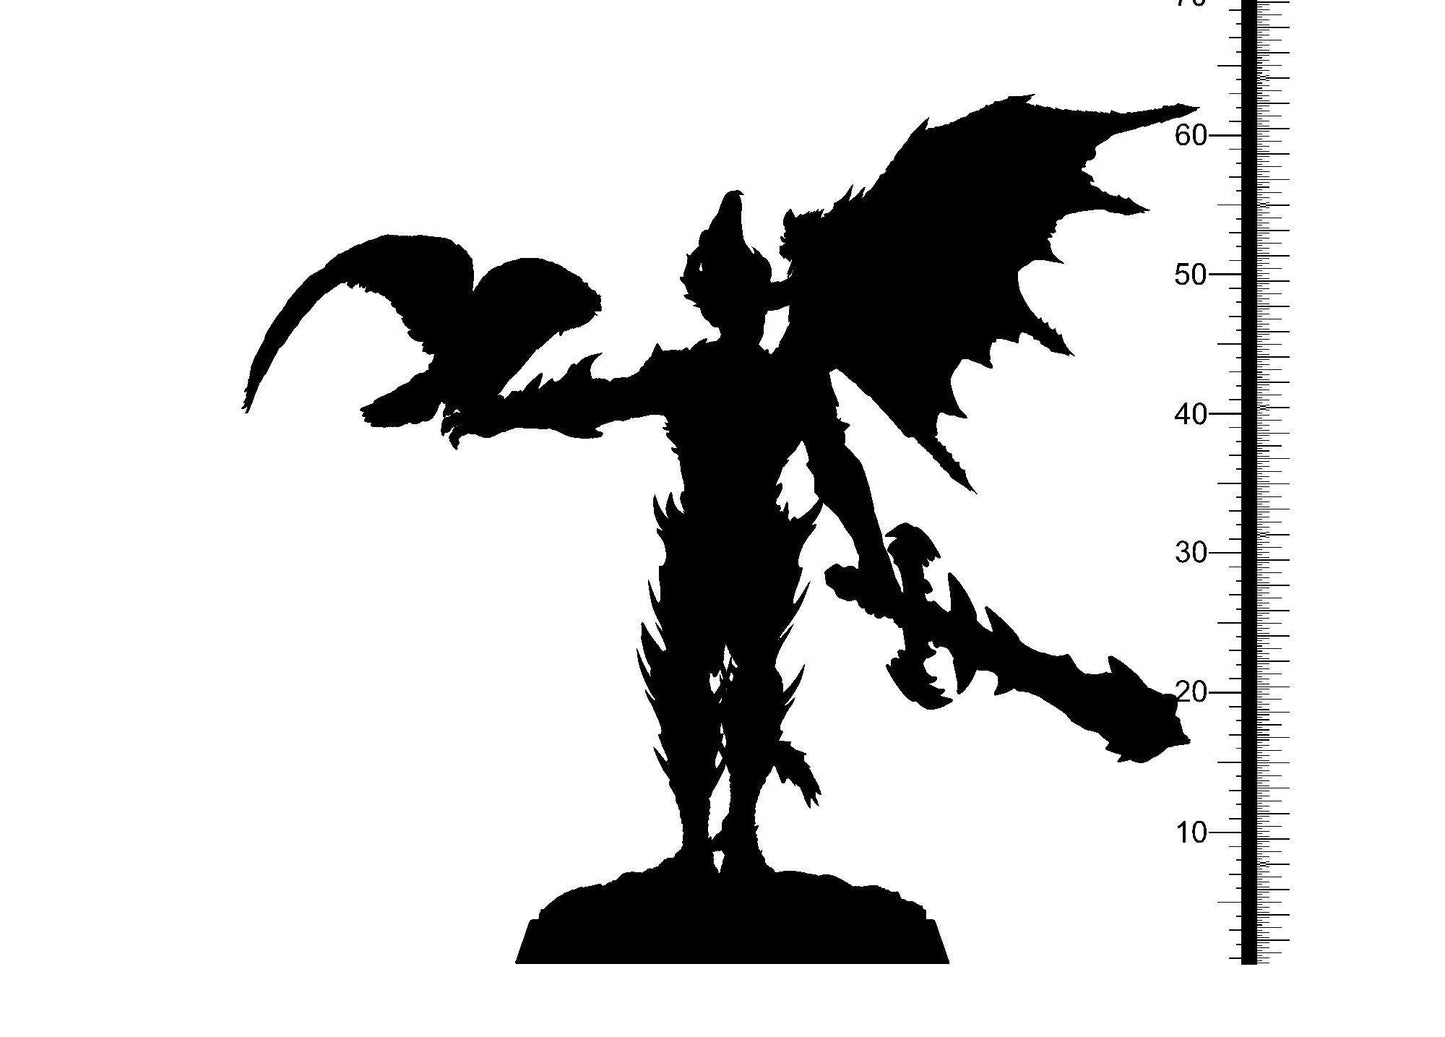 Winged Demon miniature | Aduic Clay Cyanide | Fallen Watchers | DnD Miniature | Dungeons and Dragons, DnD 5e male succubus incubus - Plague Miniatures shop for DnD Miniatures